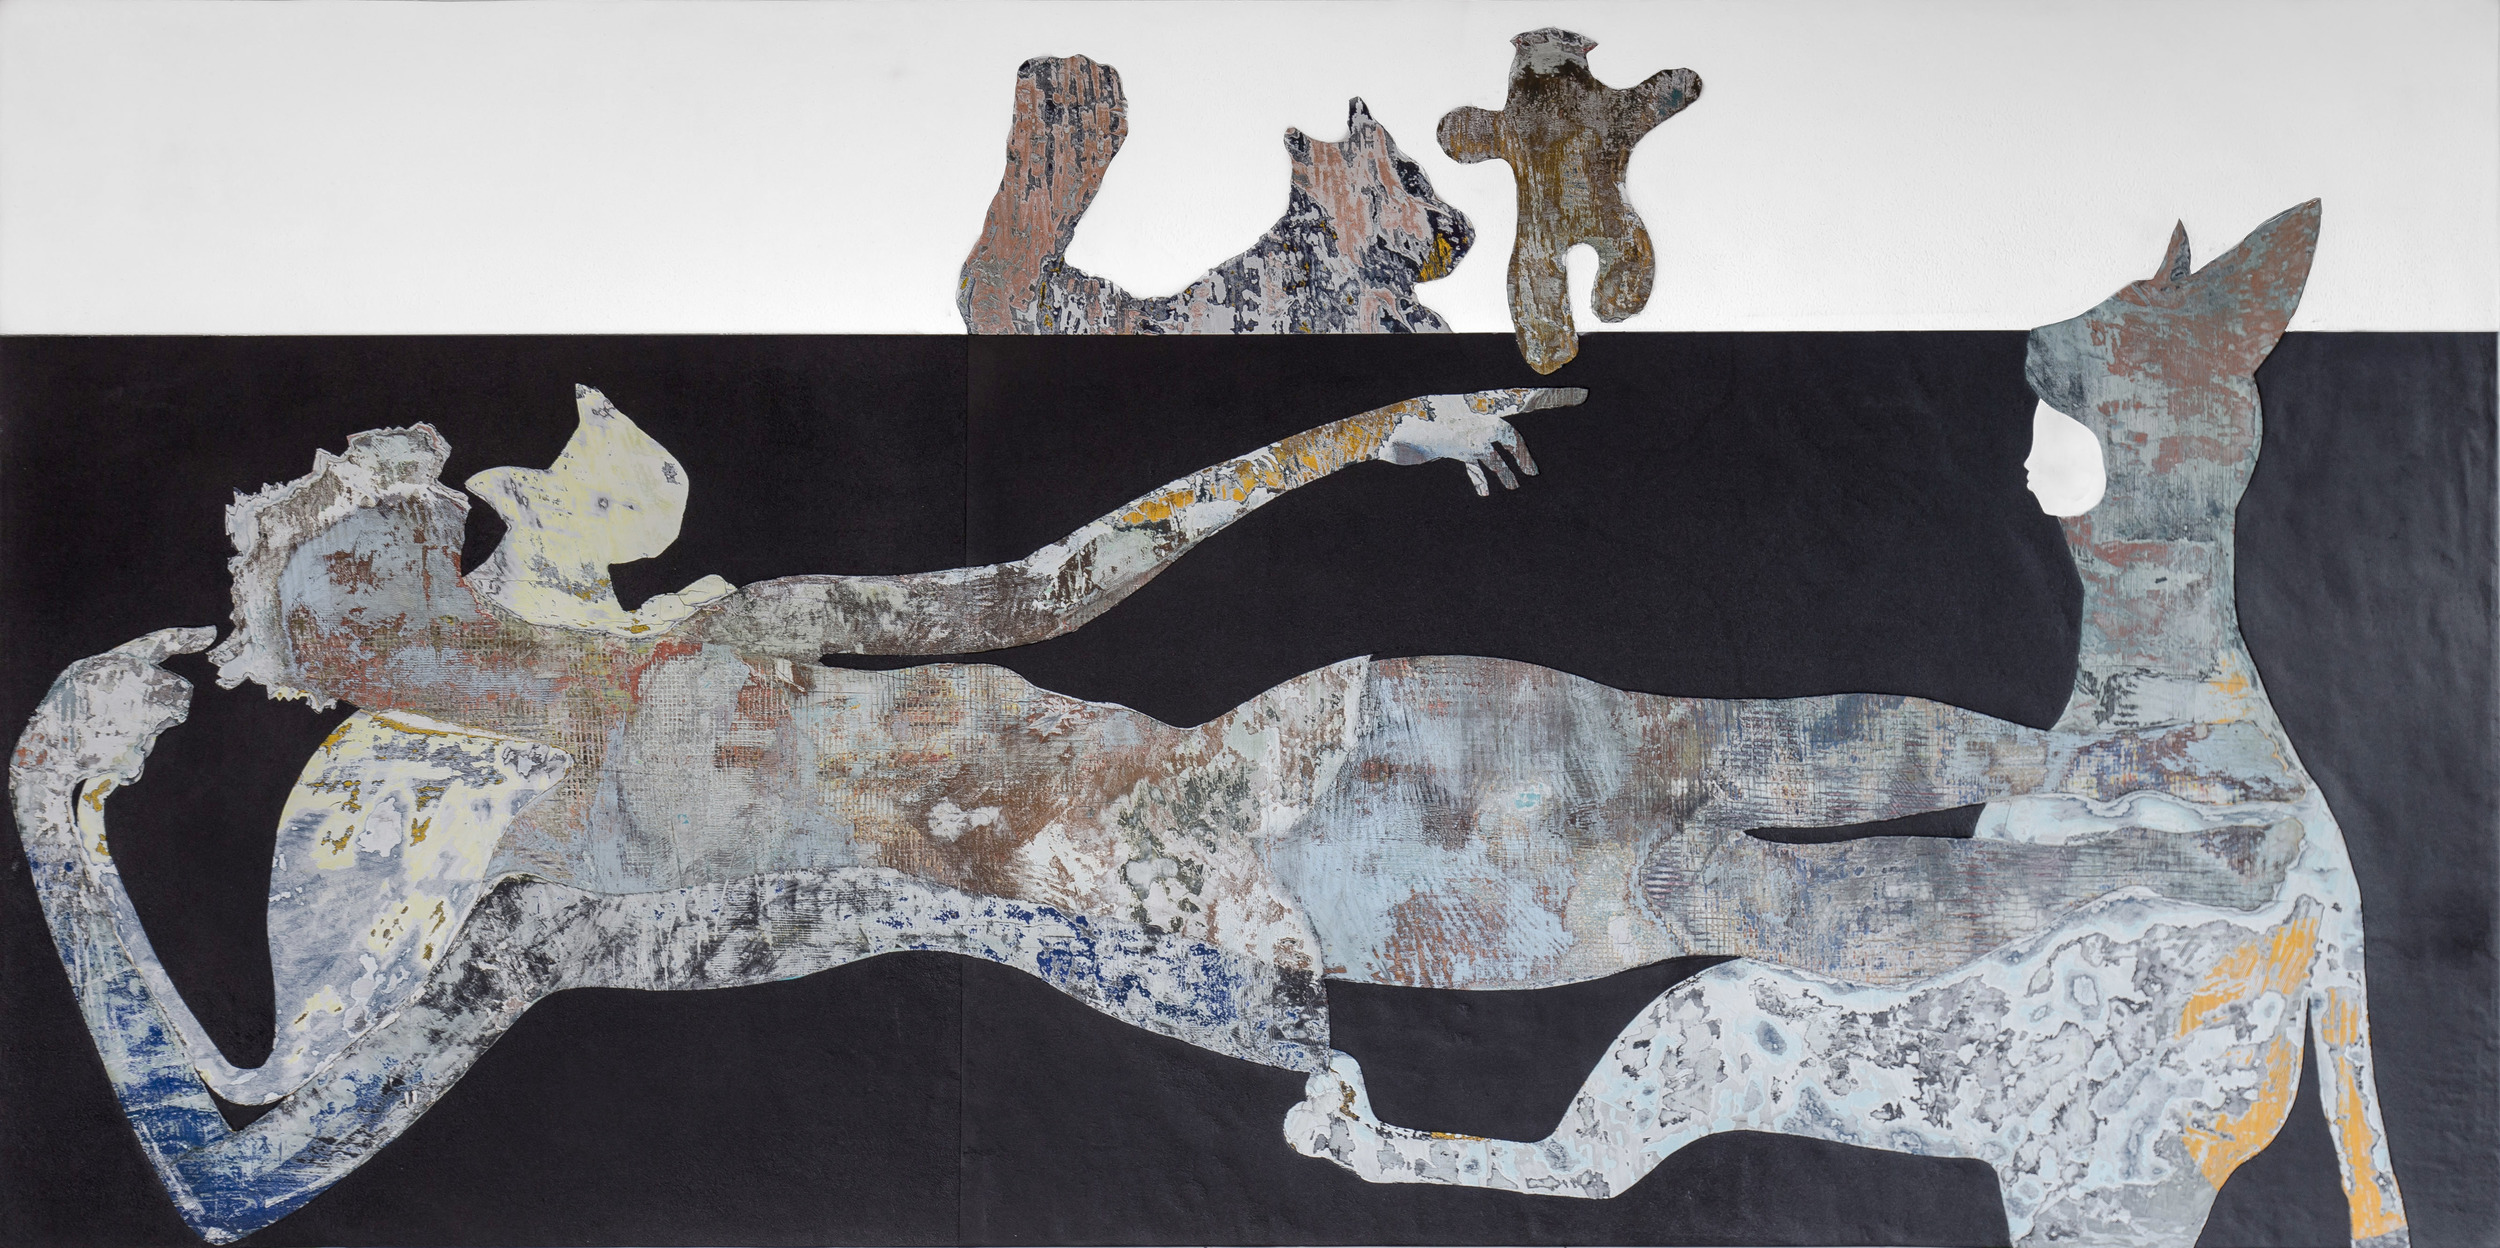  The Impossibility of Sleeping with Cats acrylic on canvas 30 x 60 inches 2015  Unavailable 